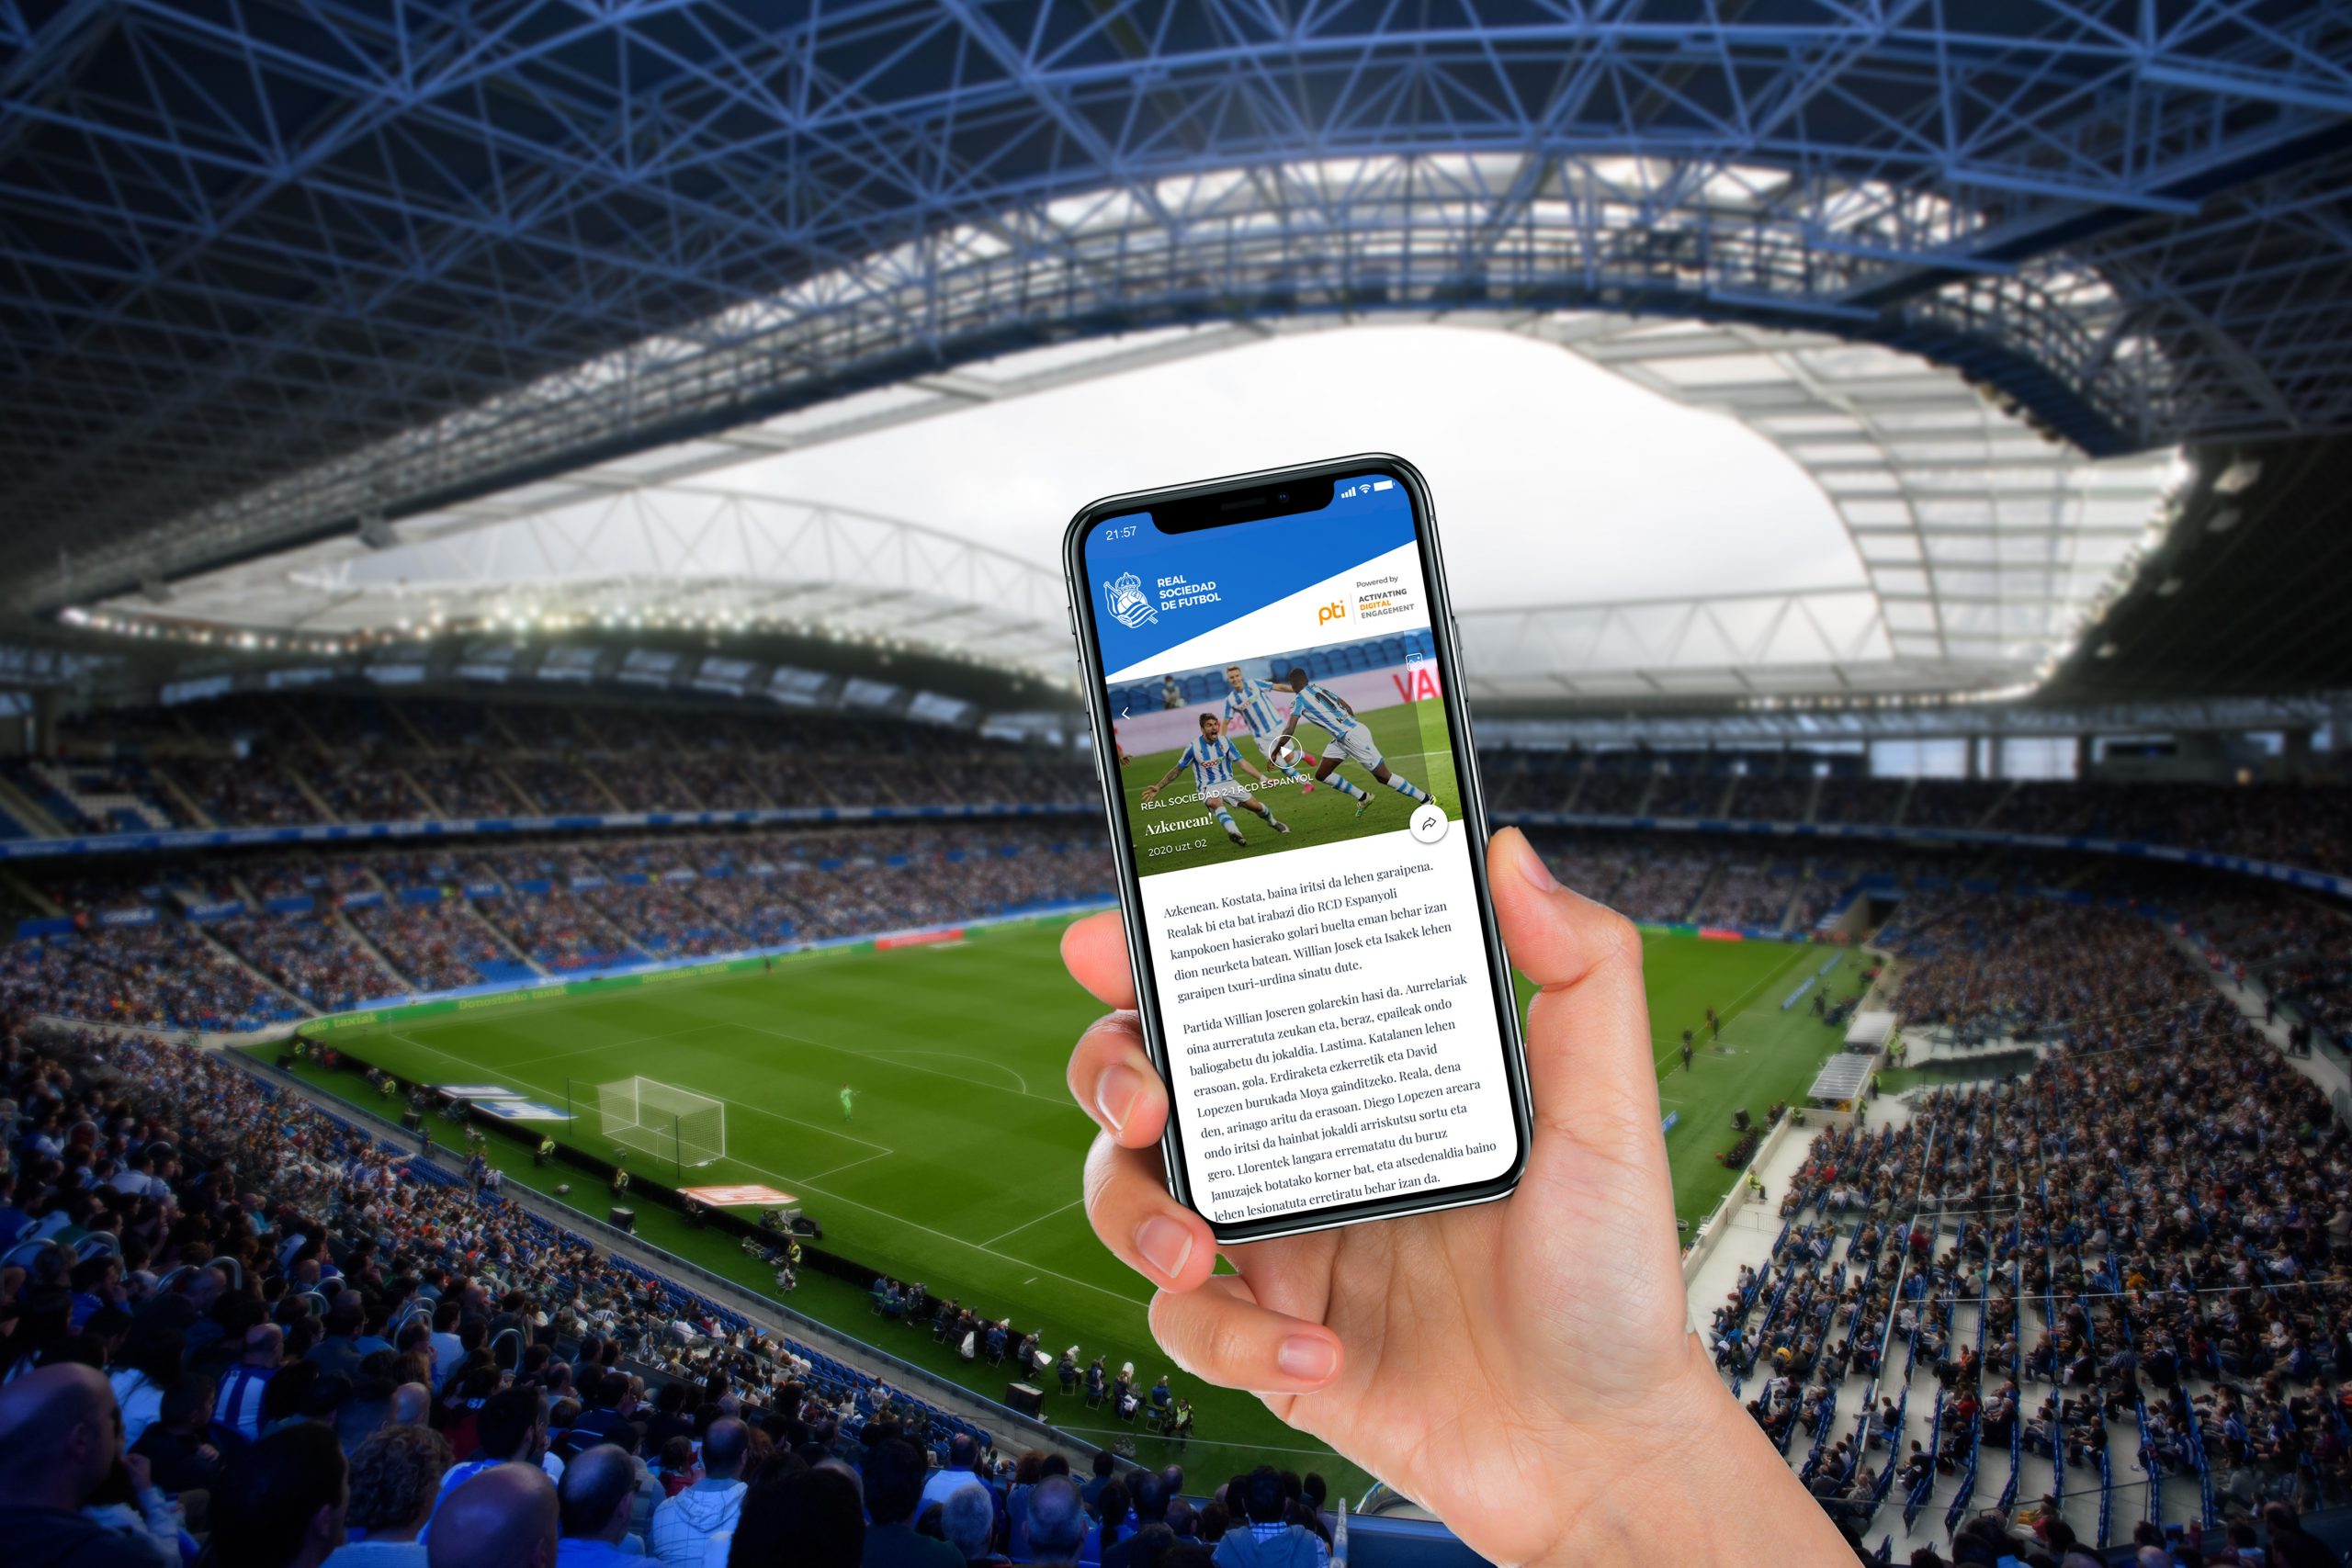 Real Sociedad turn to PTI Digital to drive enhanced mobile engagement and digital revenues